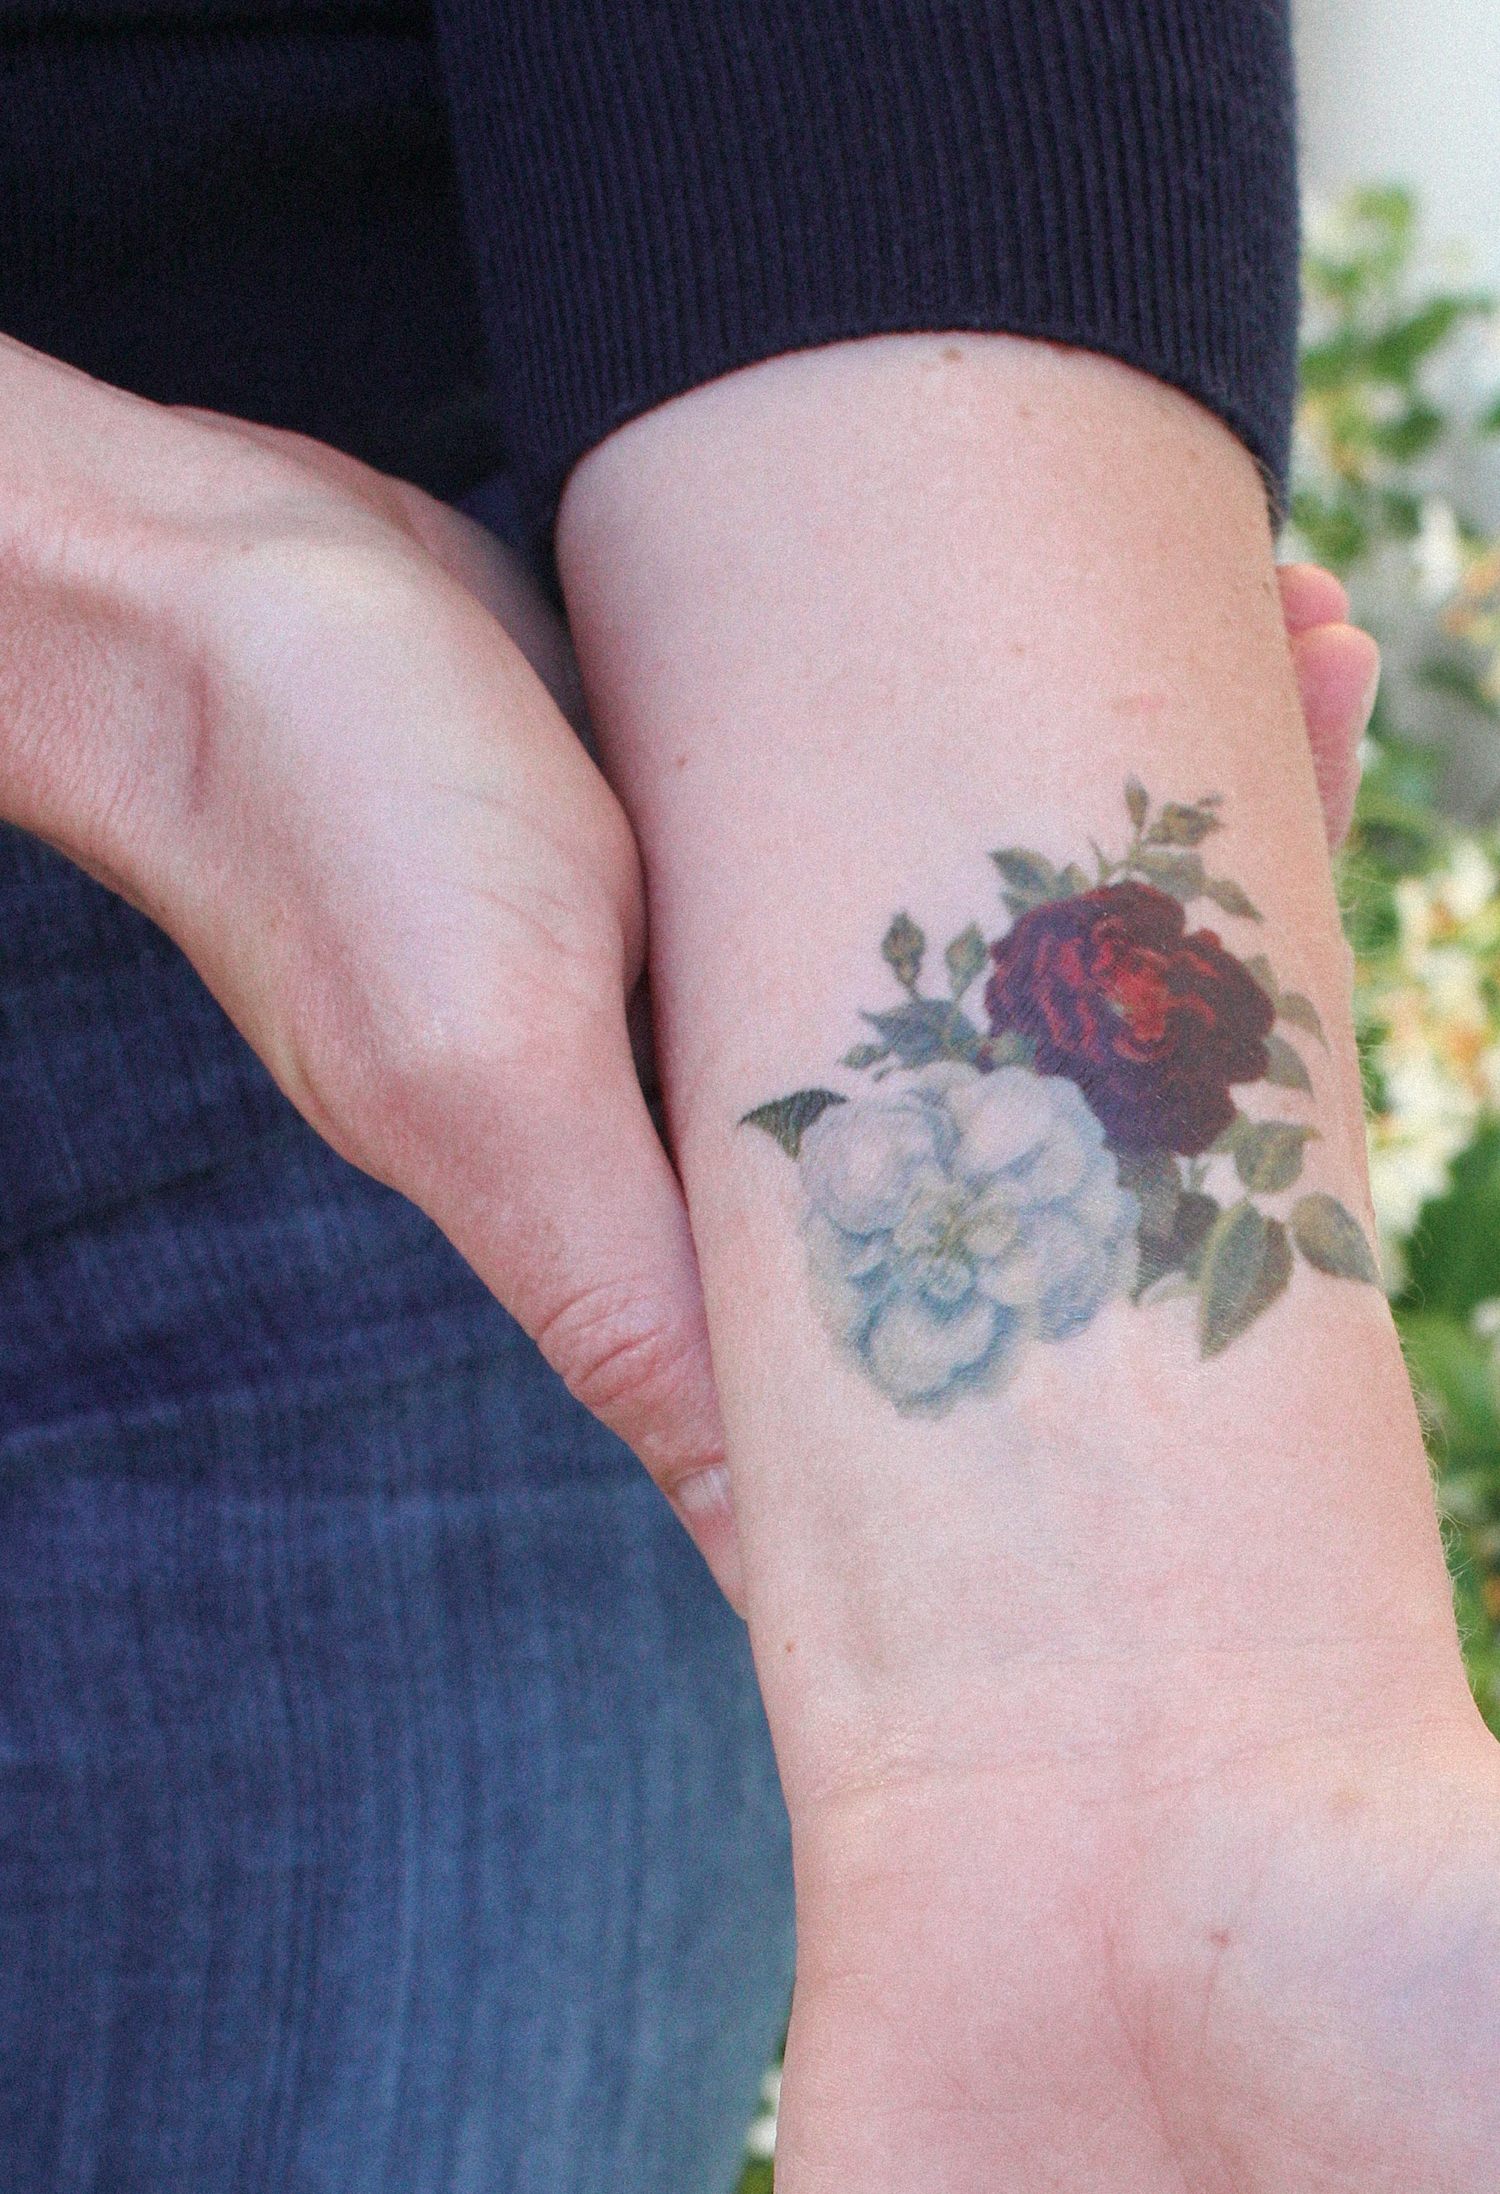 How to Make Temporary Tattoos | Apartment Therapy